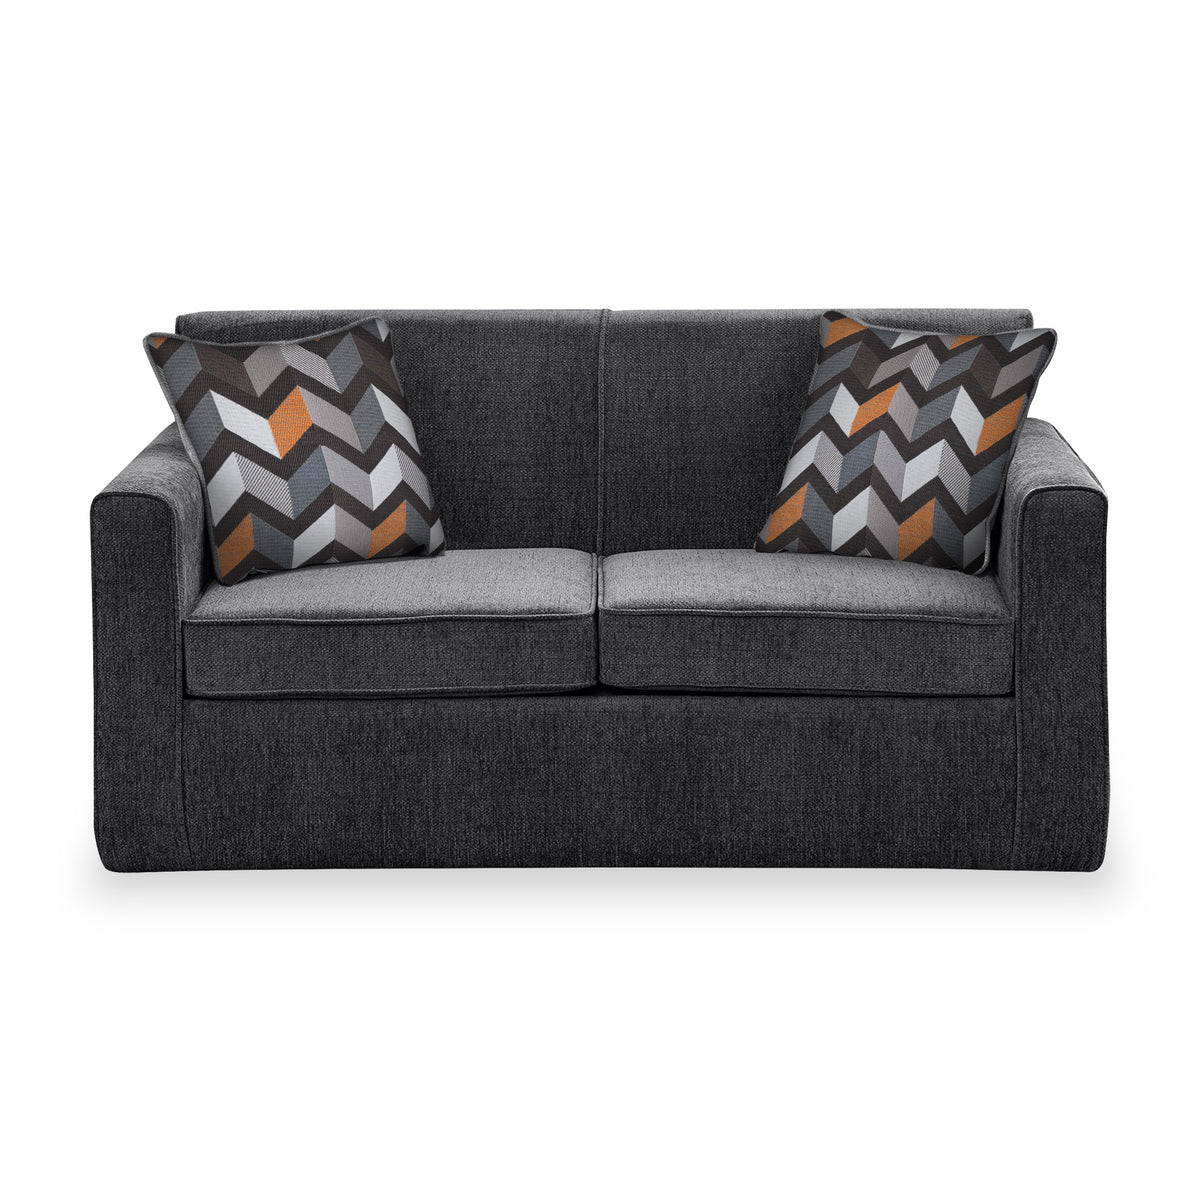 Bawtry Charcoal Faux Linen 2 Seater Sofabed with Charcoal Scatter Cushions from Roseland Furniture